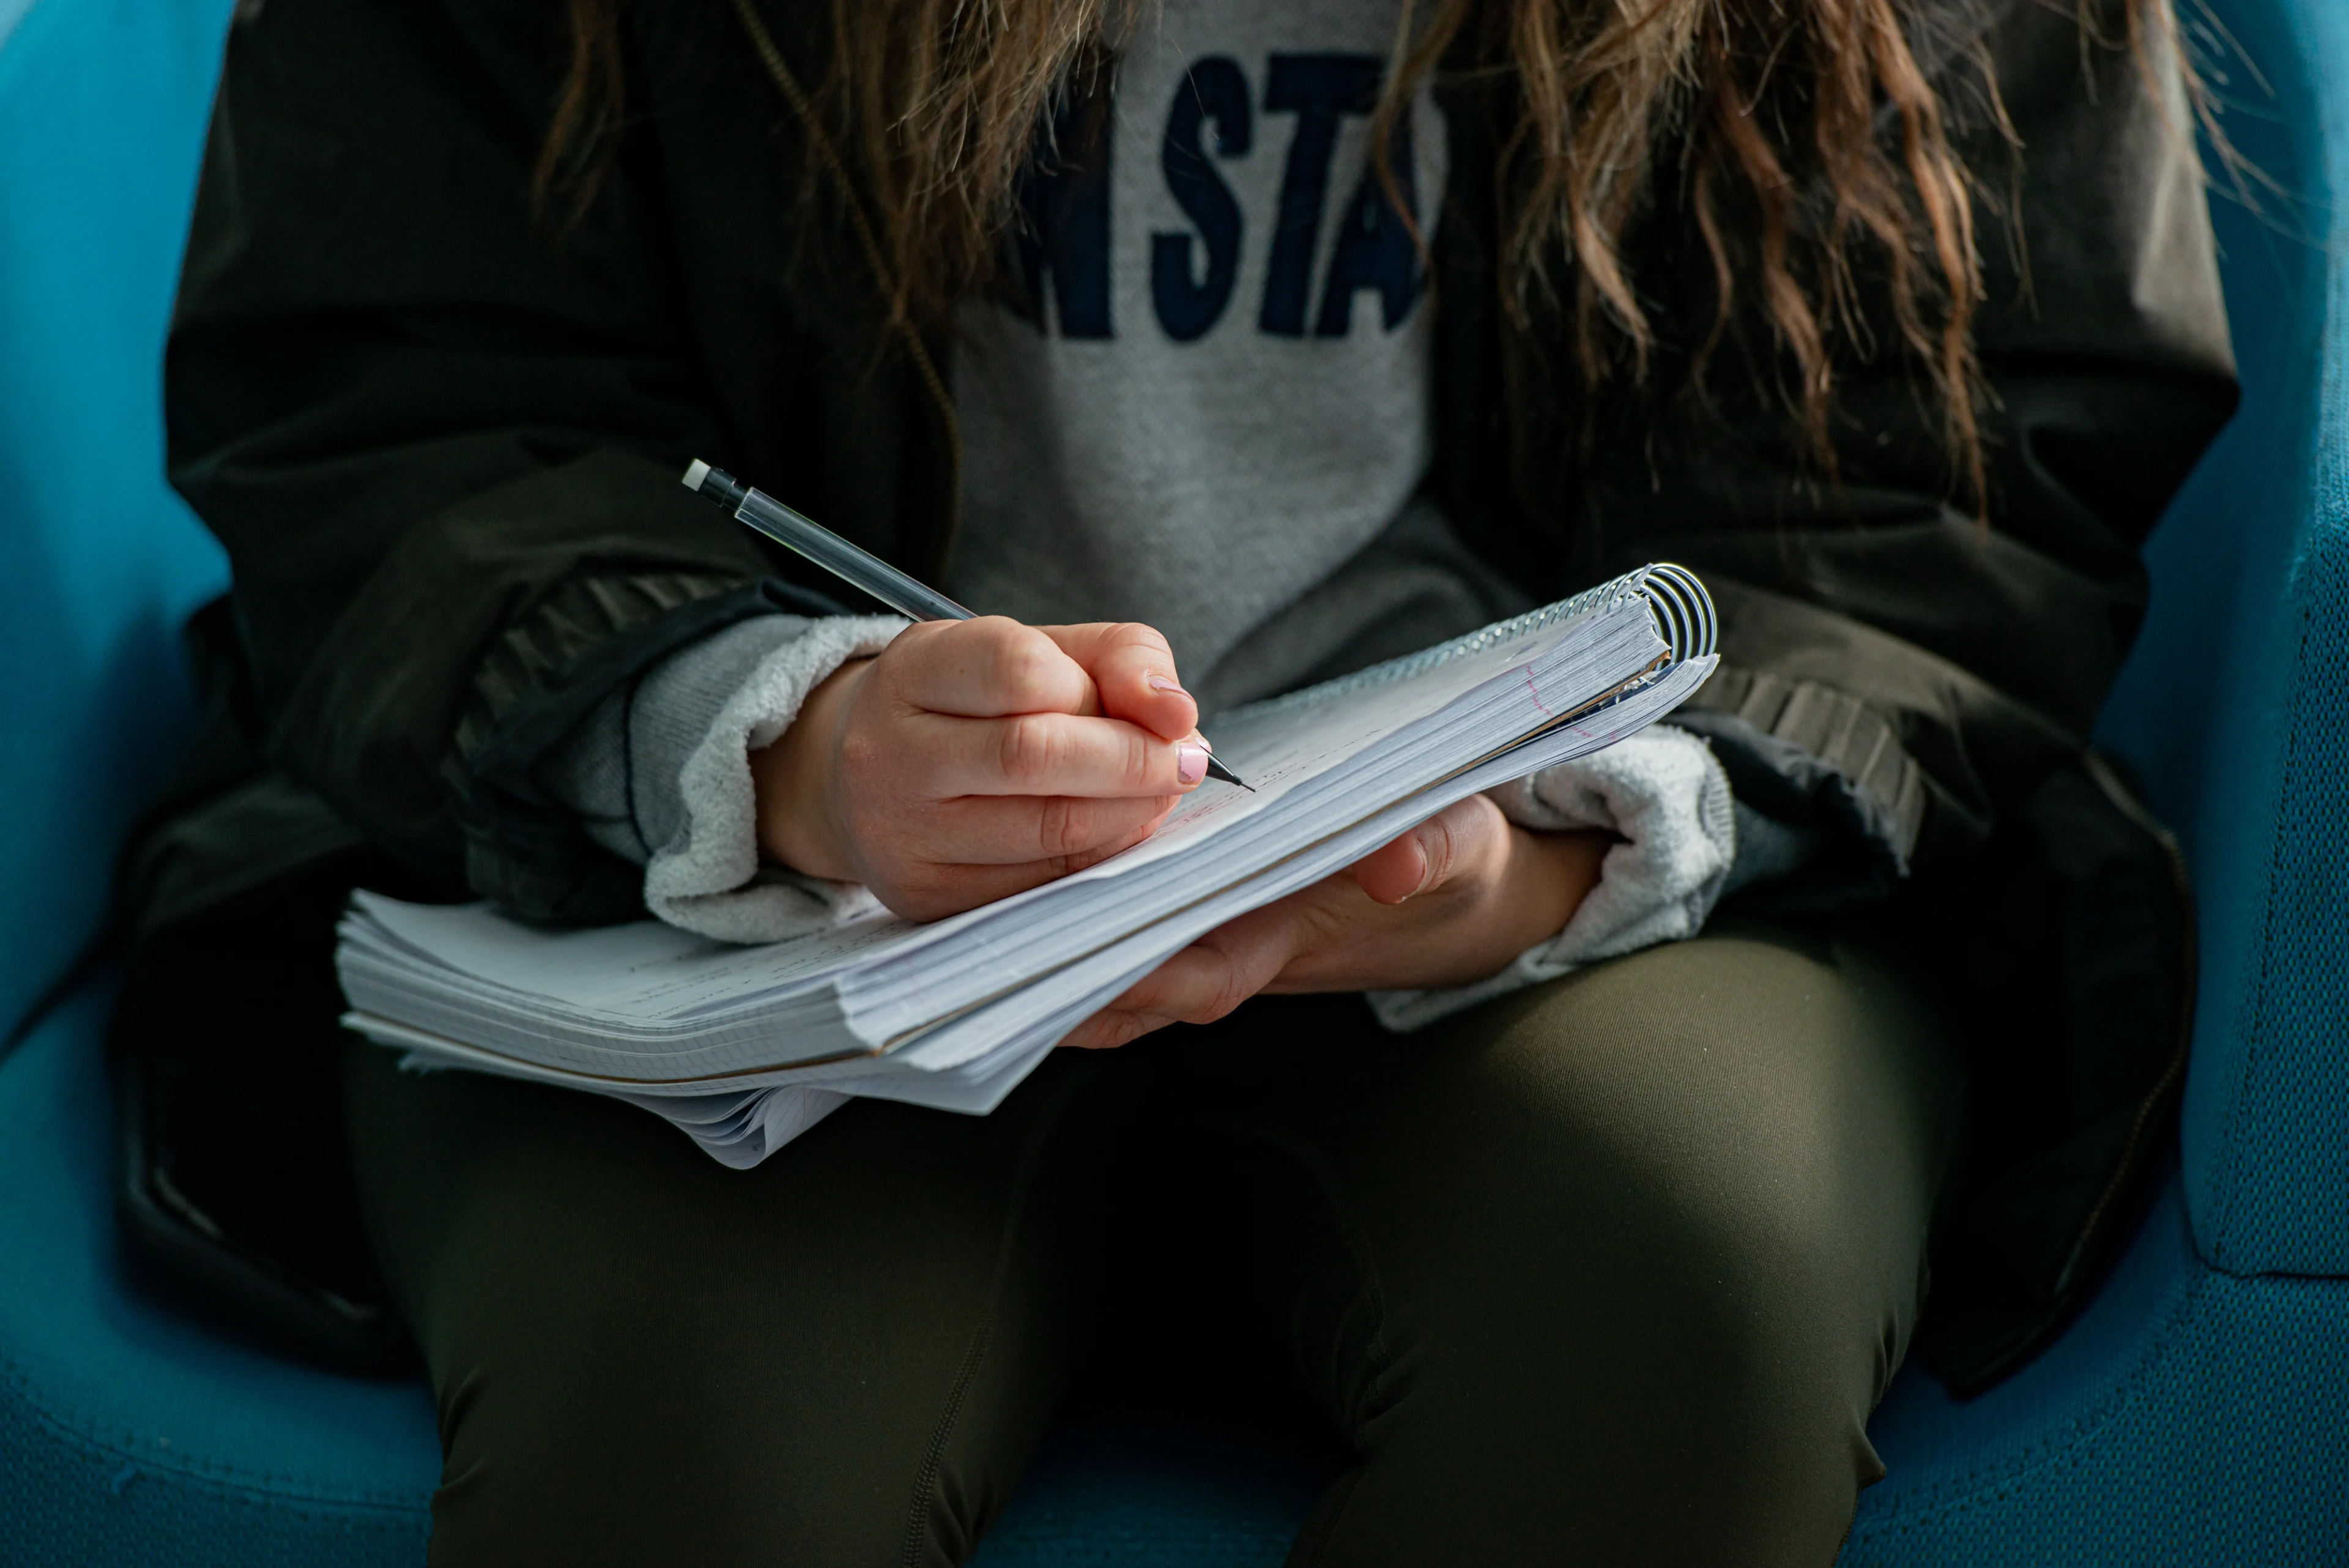 Student with Penn State sweatshirt writing in notebook.